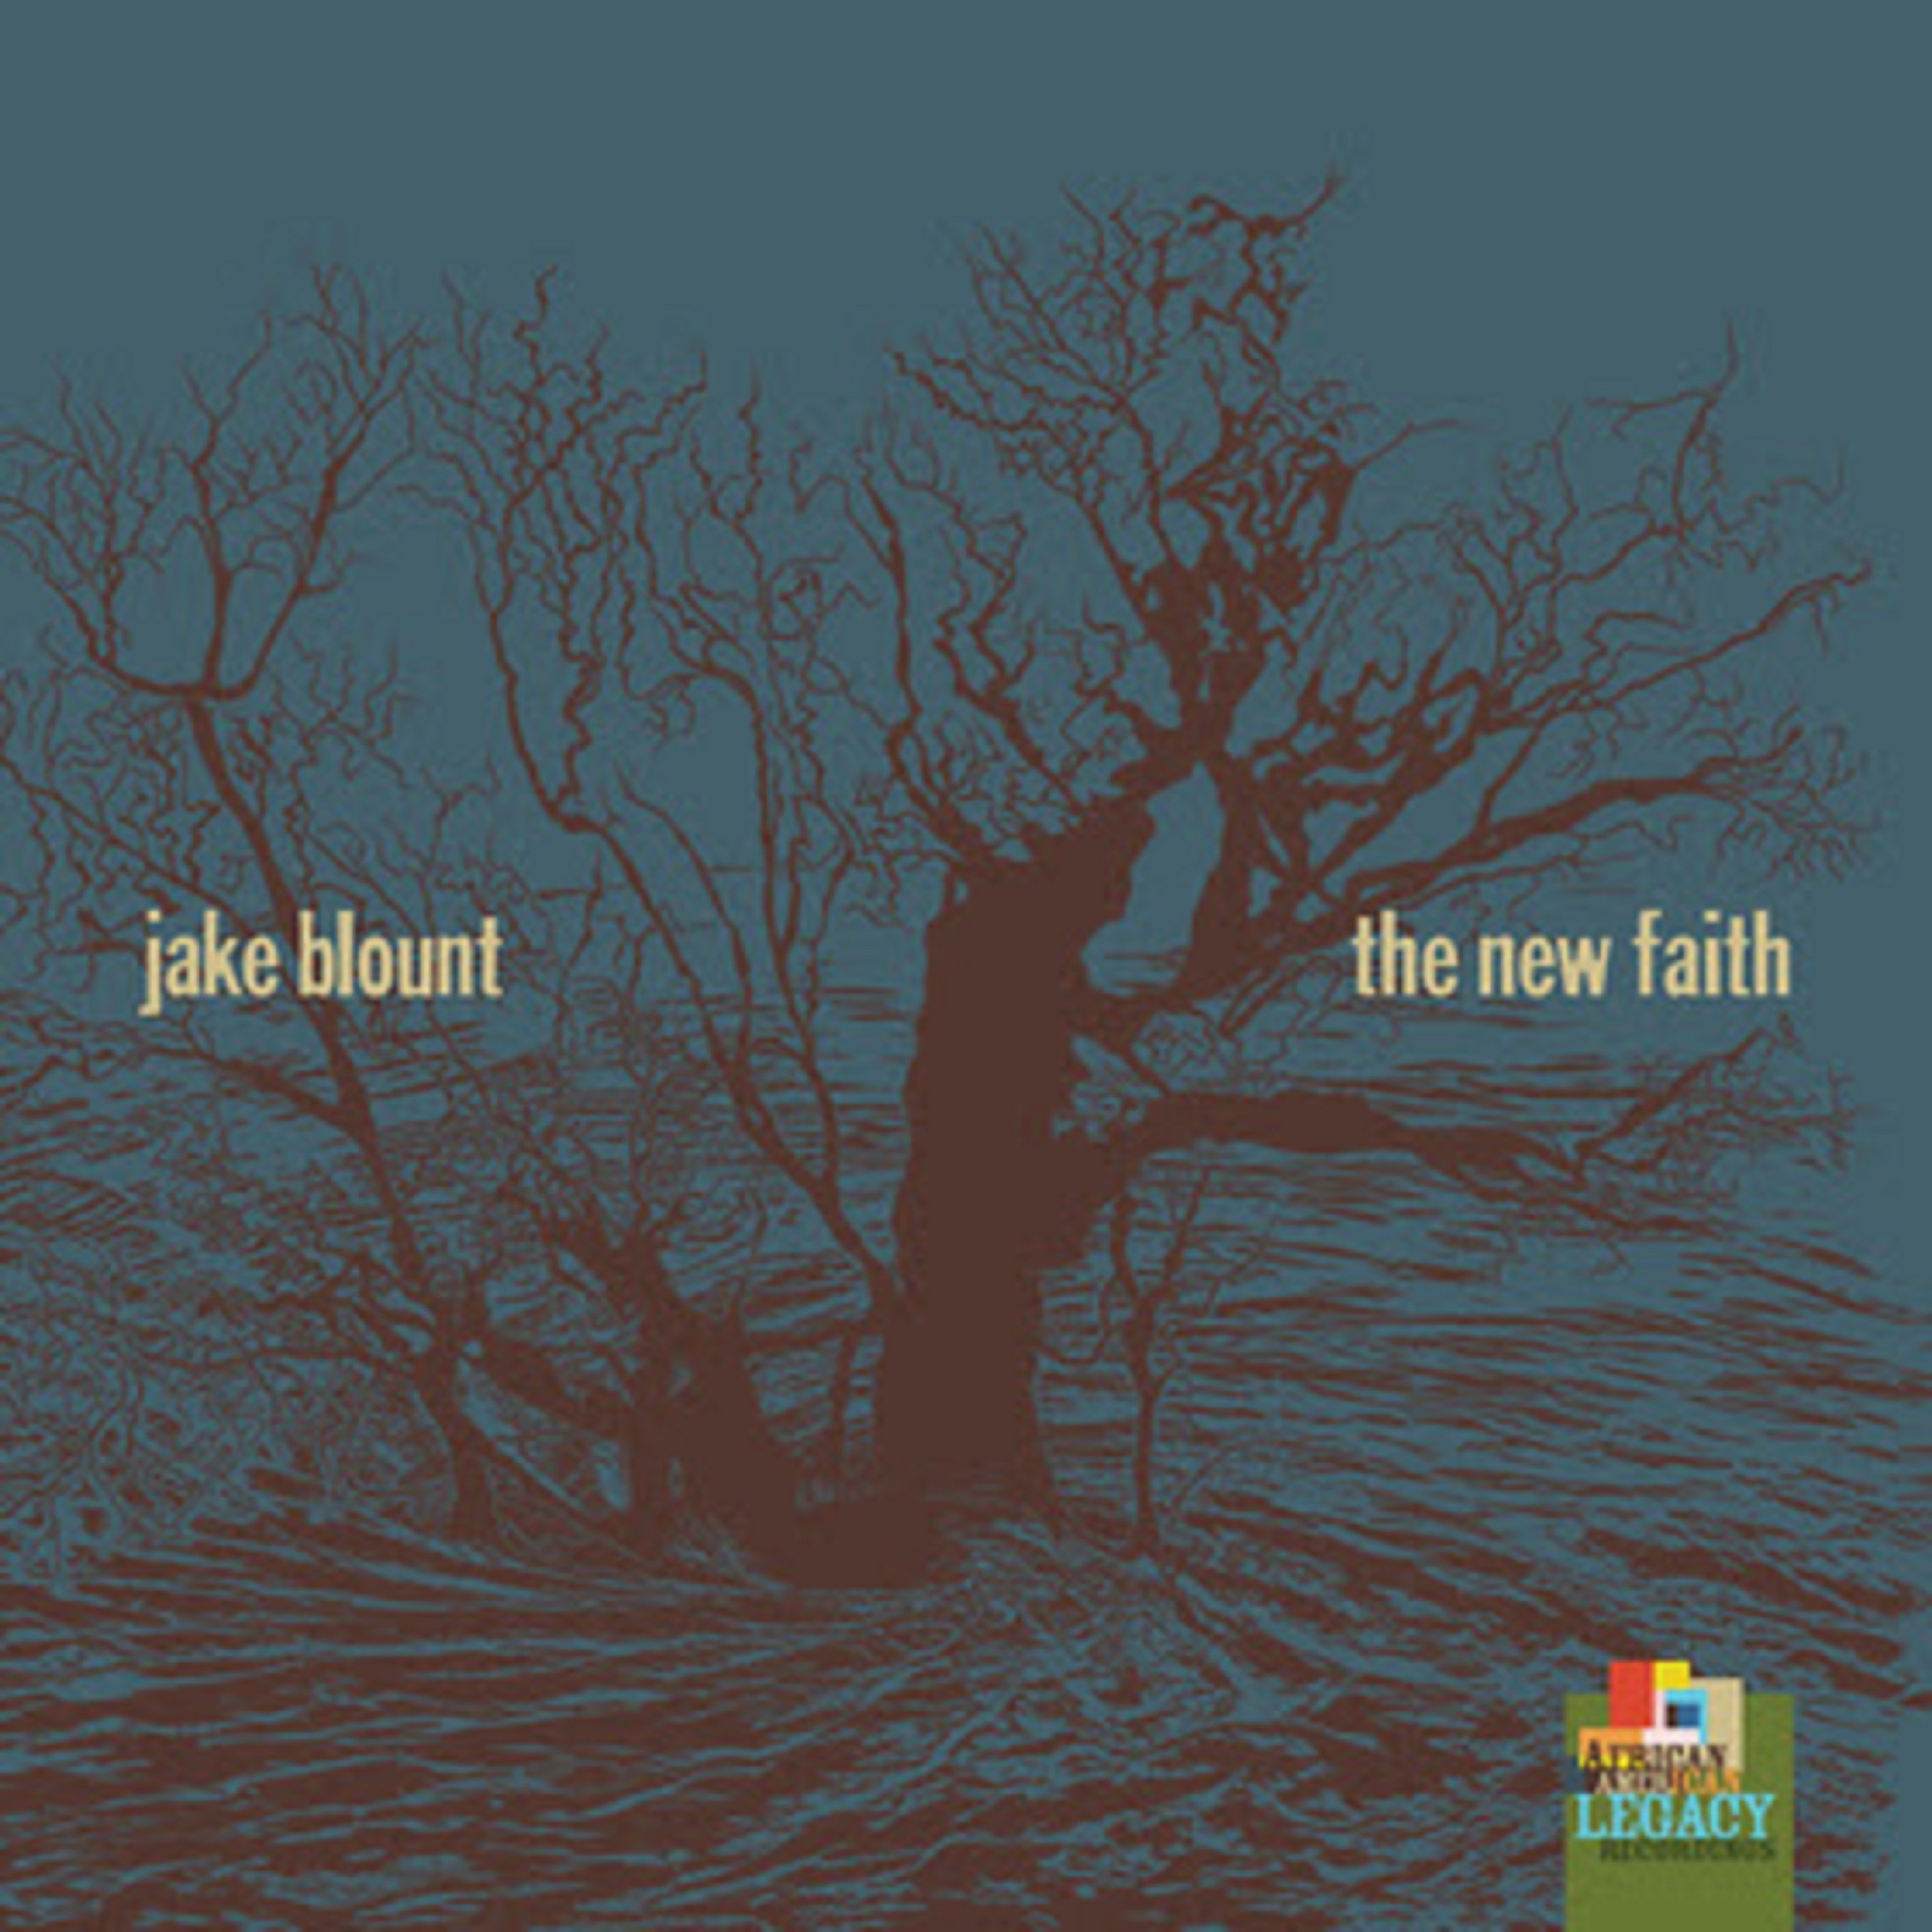 Jake Blount’s new album "The New Faith" out today